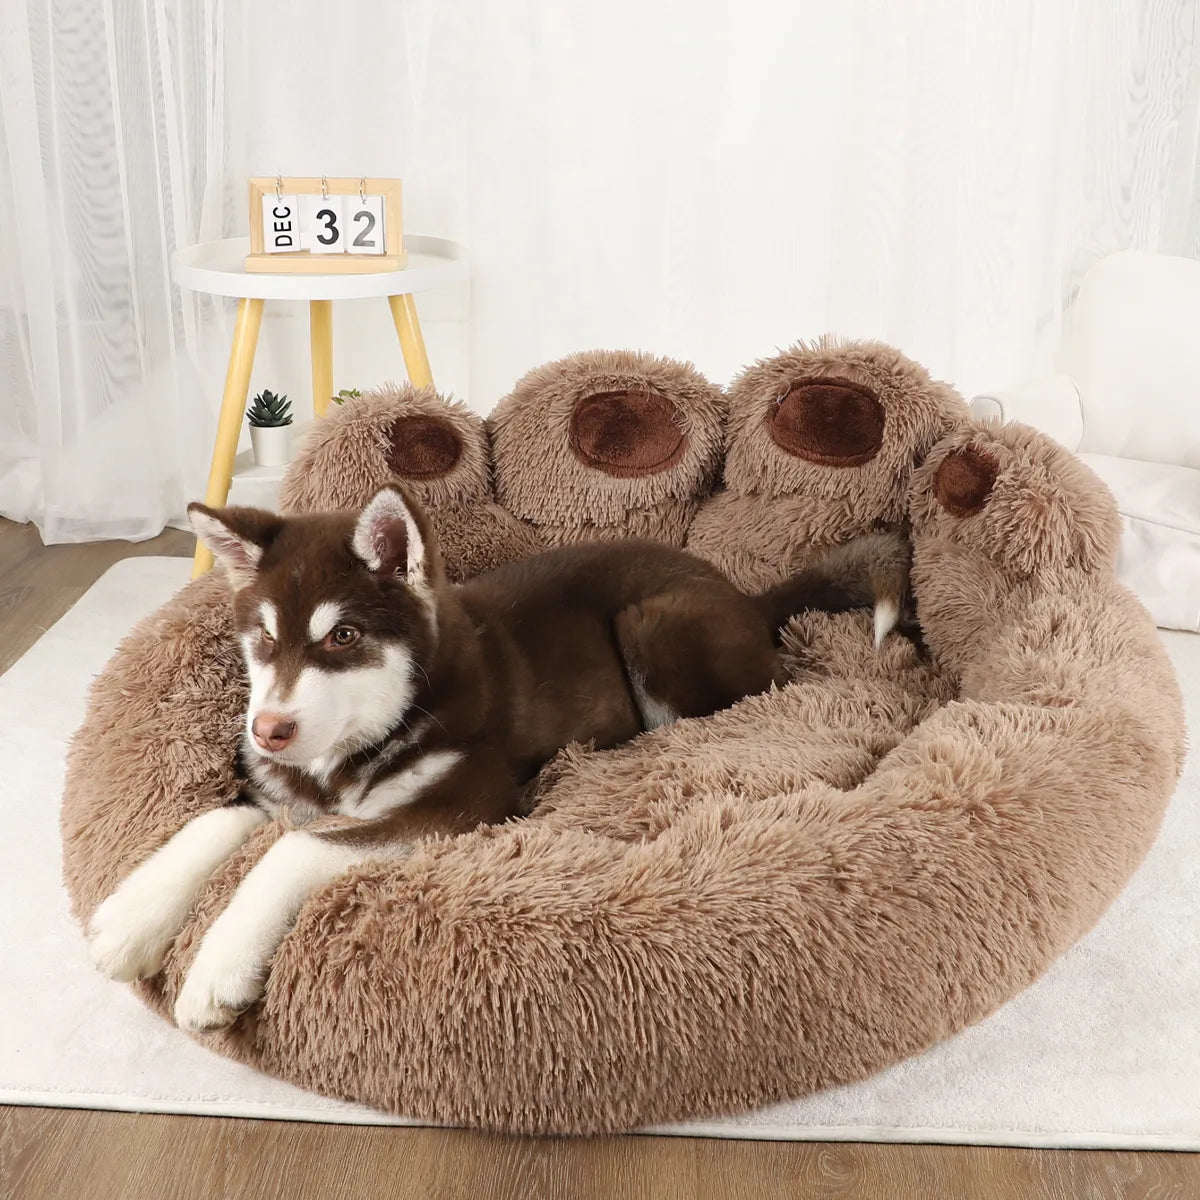 Washable plush sofa bed for 70cm dogs and cats - 3 colors